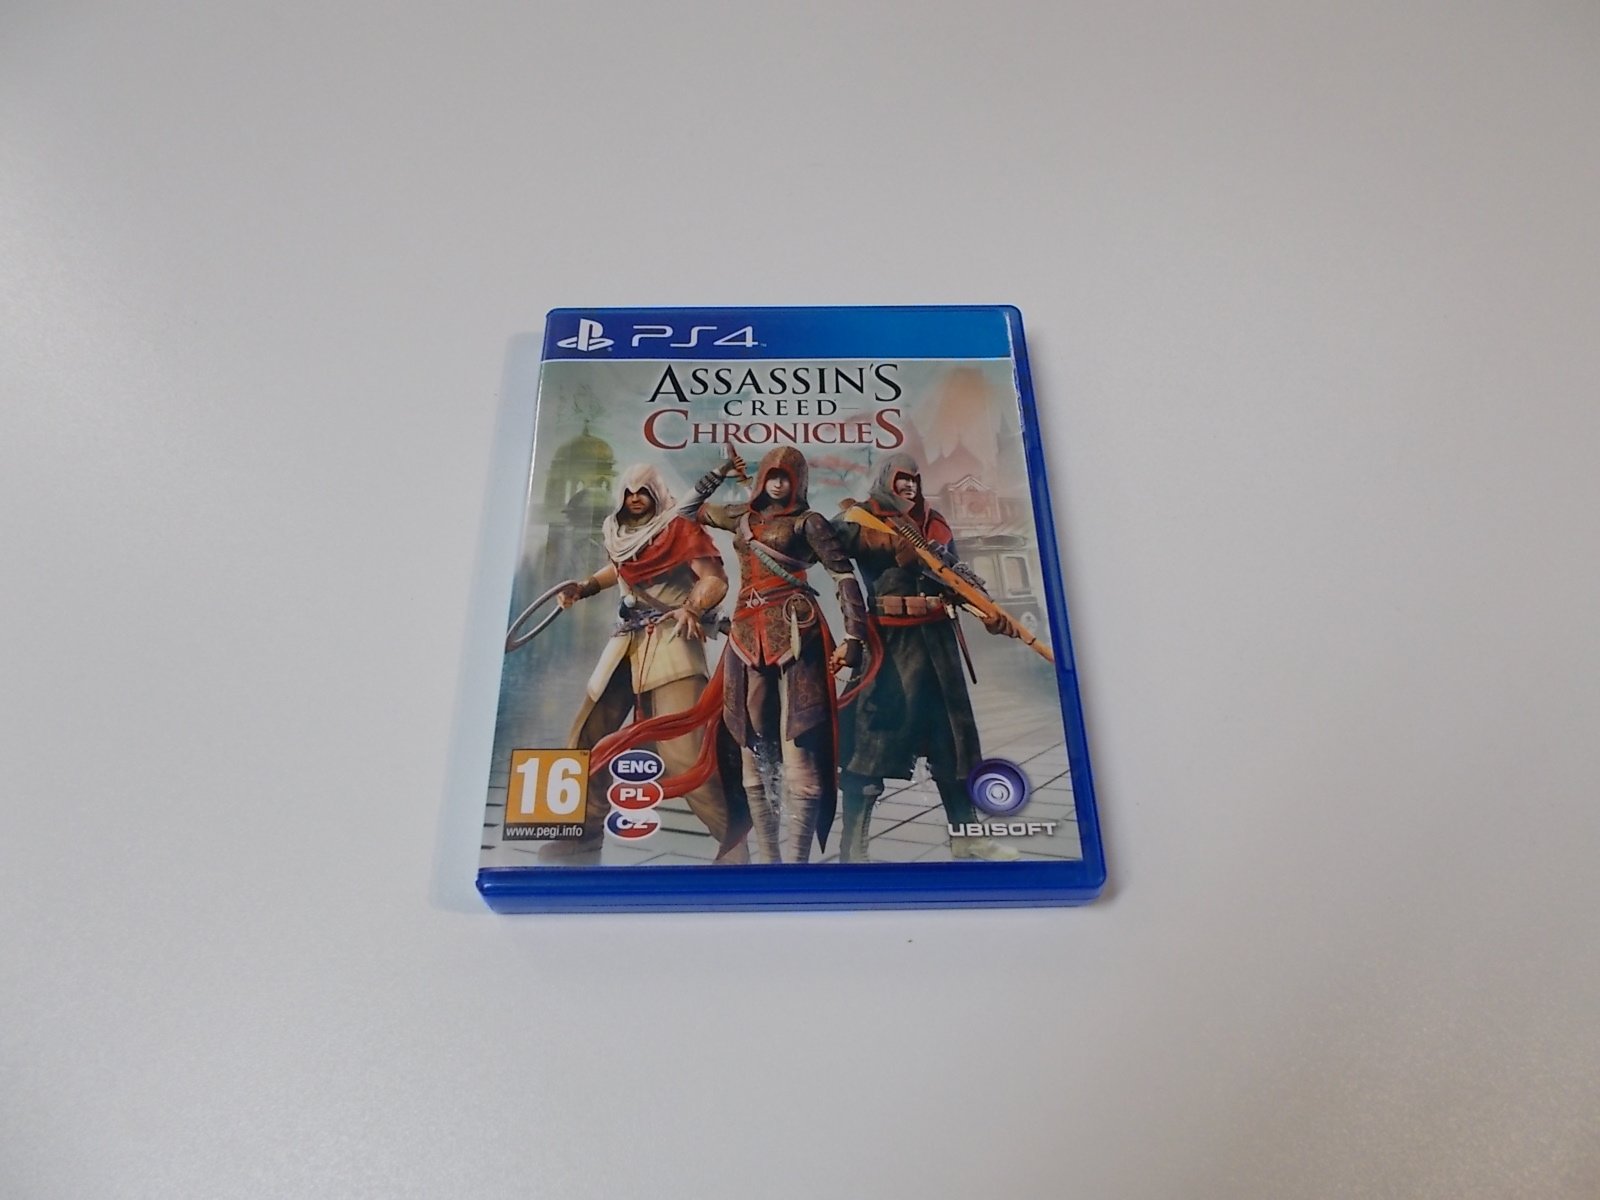 Assassin's Creed Chronicles - GRA Ps4 - Opole 0491